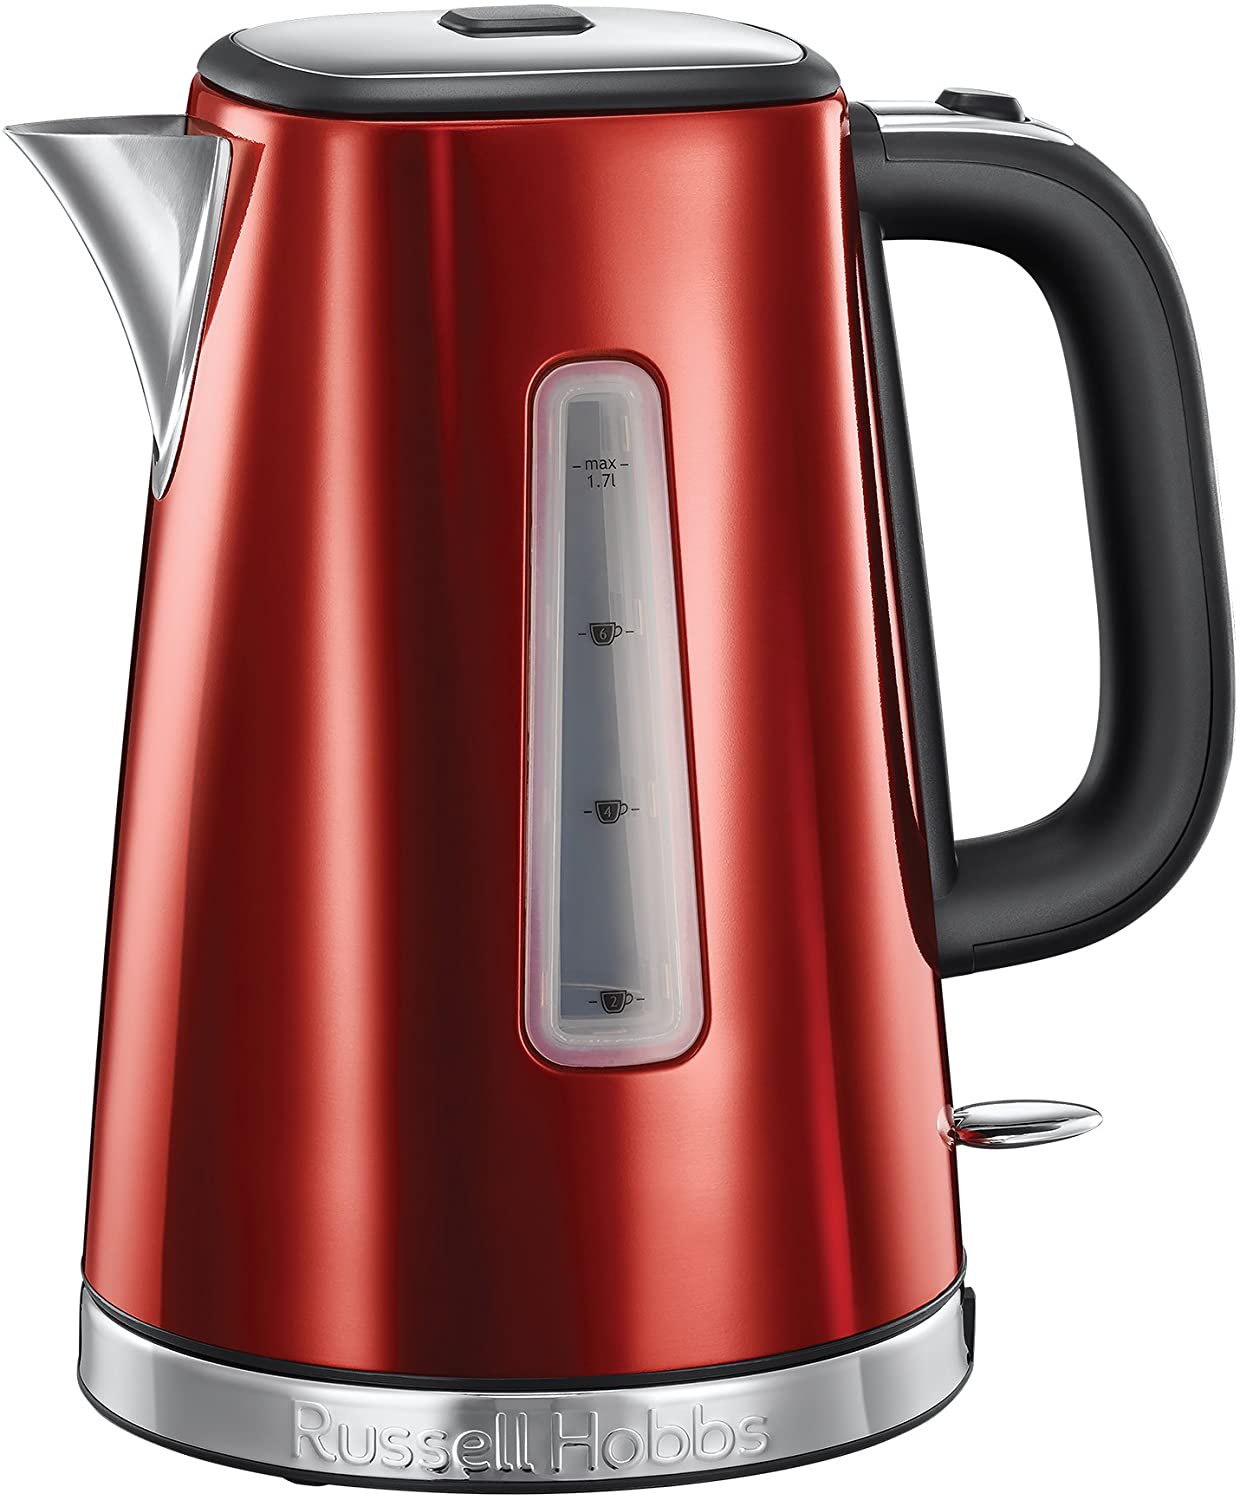 Russell Hobbs Kettle, Luna red, 1.7 l, 2400 W, pressure boiling function, optimised spout, limescale filter, water level indicator with capacity marking, tea maker 23210-70